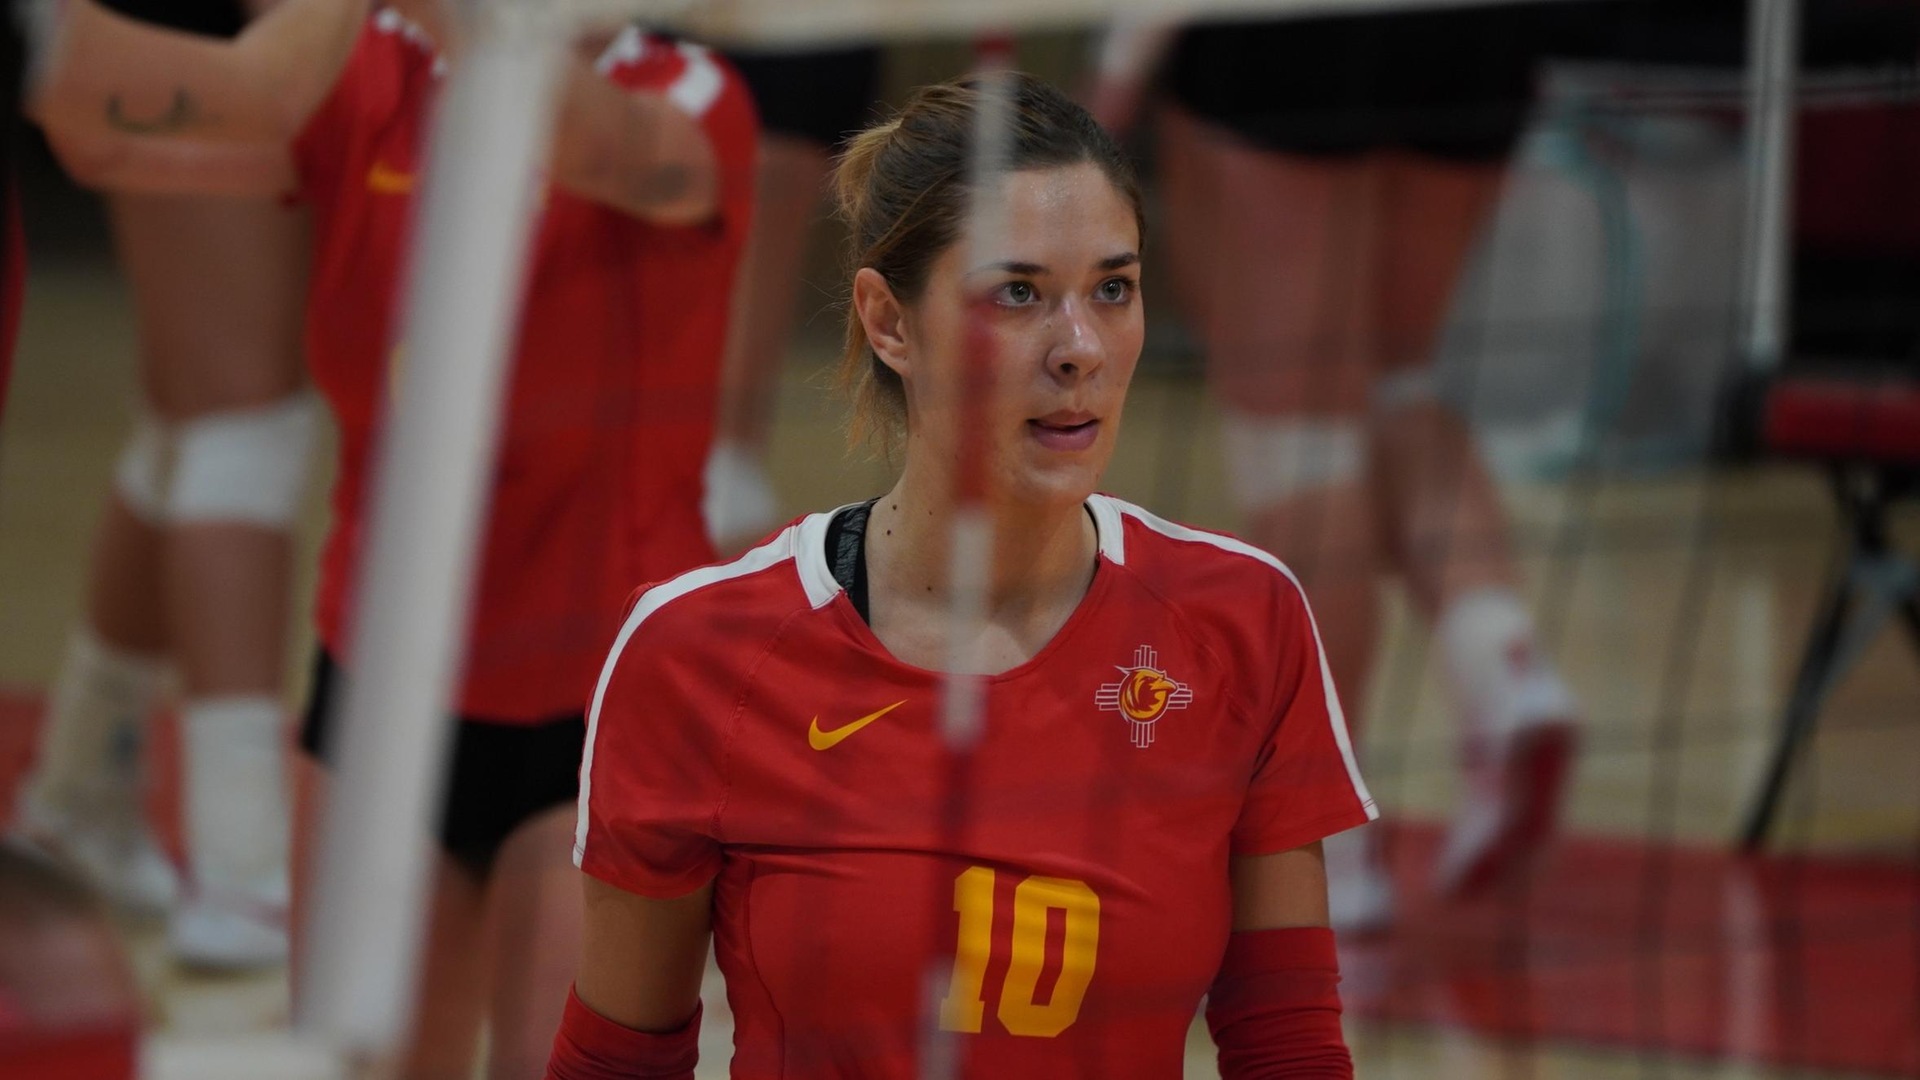 NMJC Earns First Home Win Over NMMI